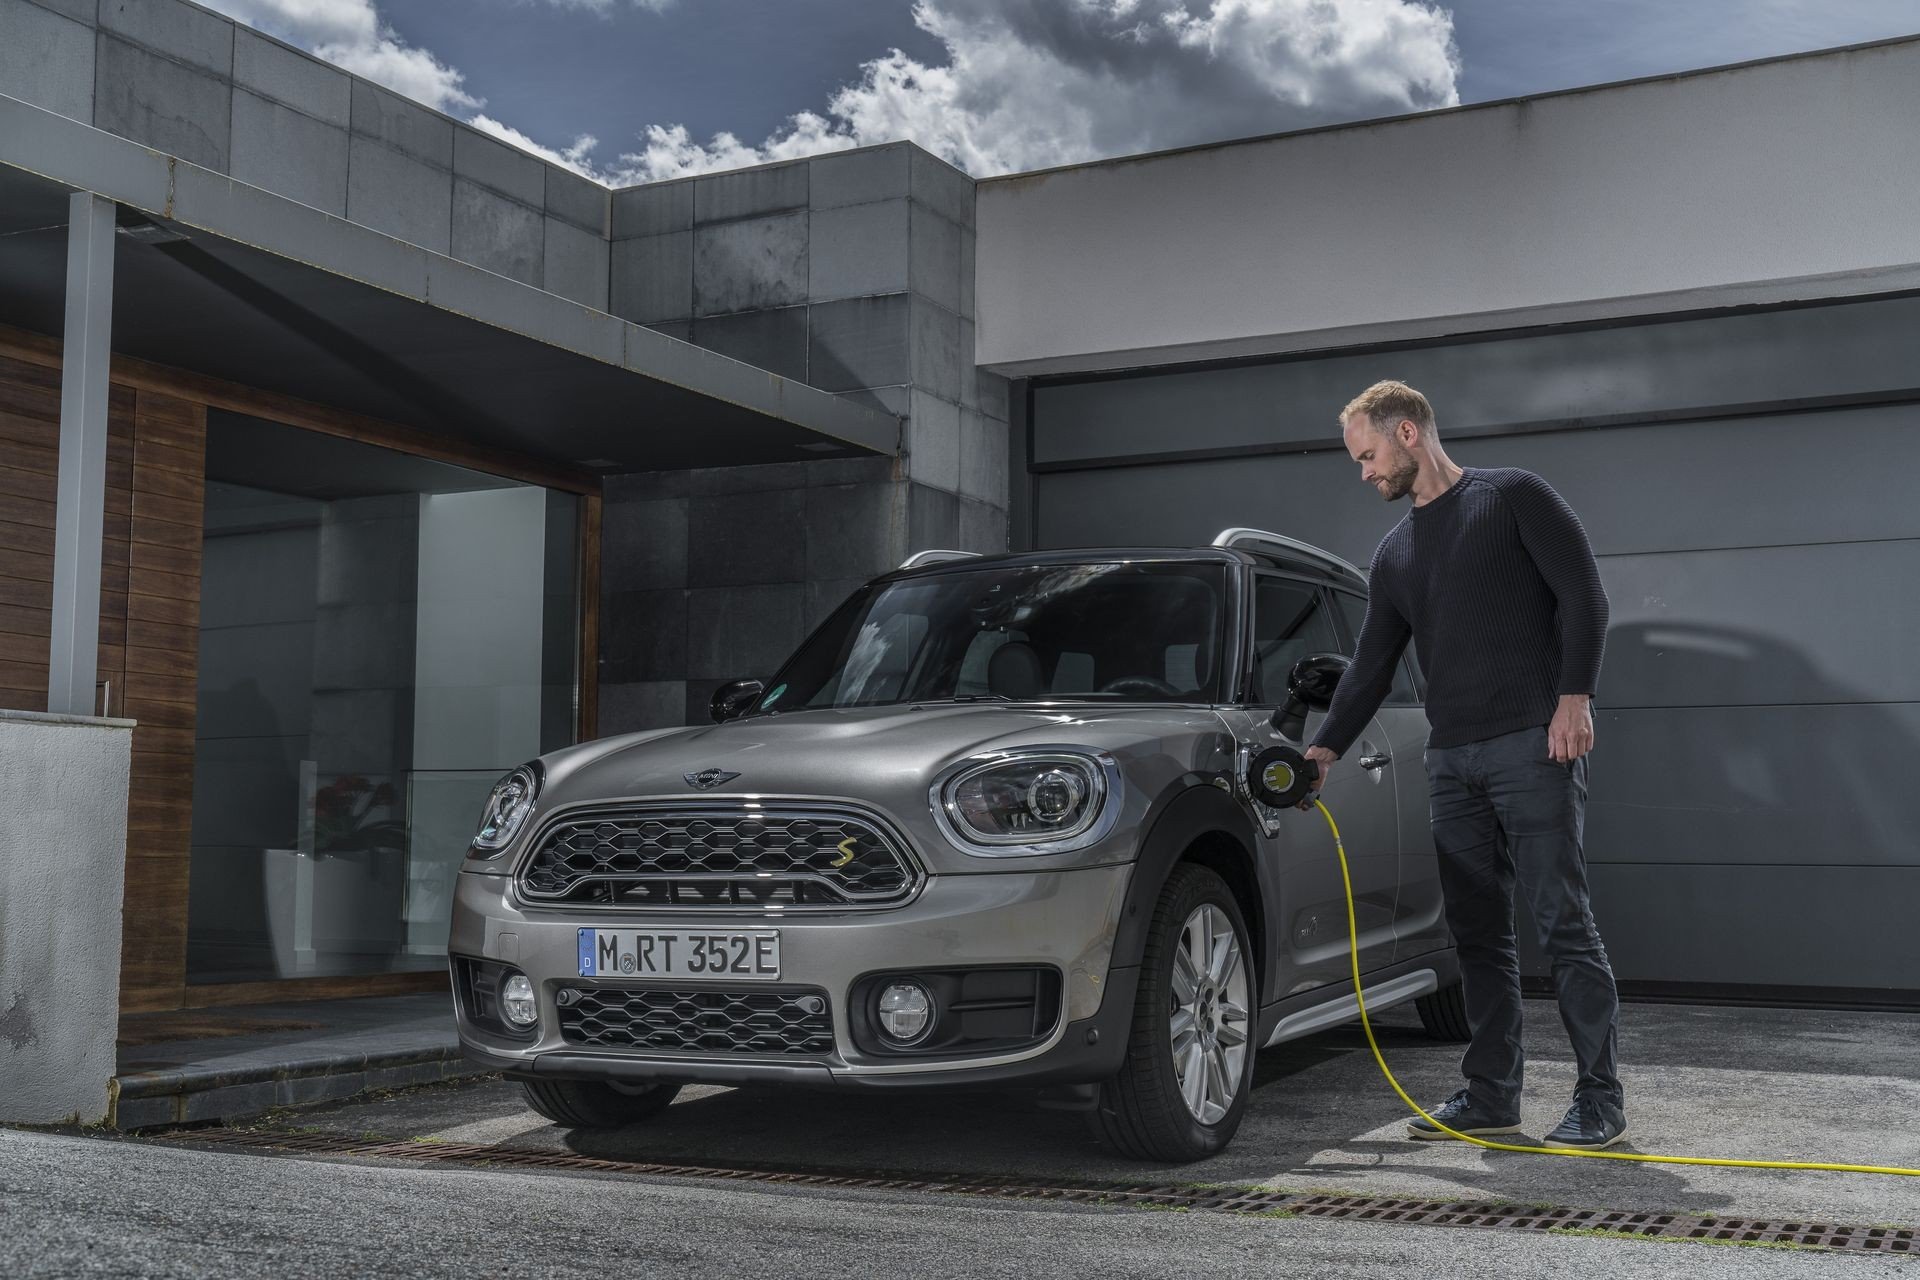 The improved quality and variety of electric vehicles and hybrid options, such as the MINI Cooper S E Countryman ALL4 (above), plus enhanced access to charging services across Hong Kong, are likely to encourage more motorists to switch to greener vehicles.